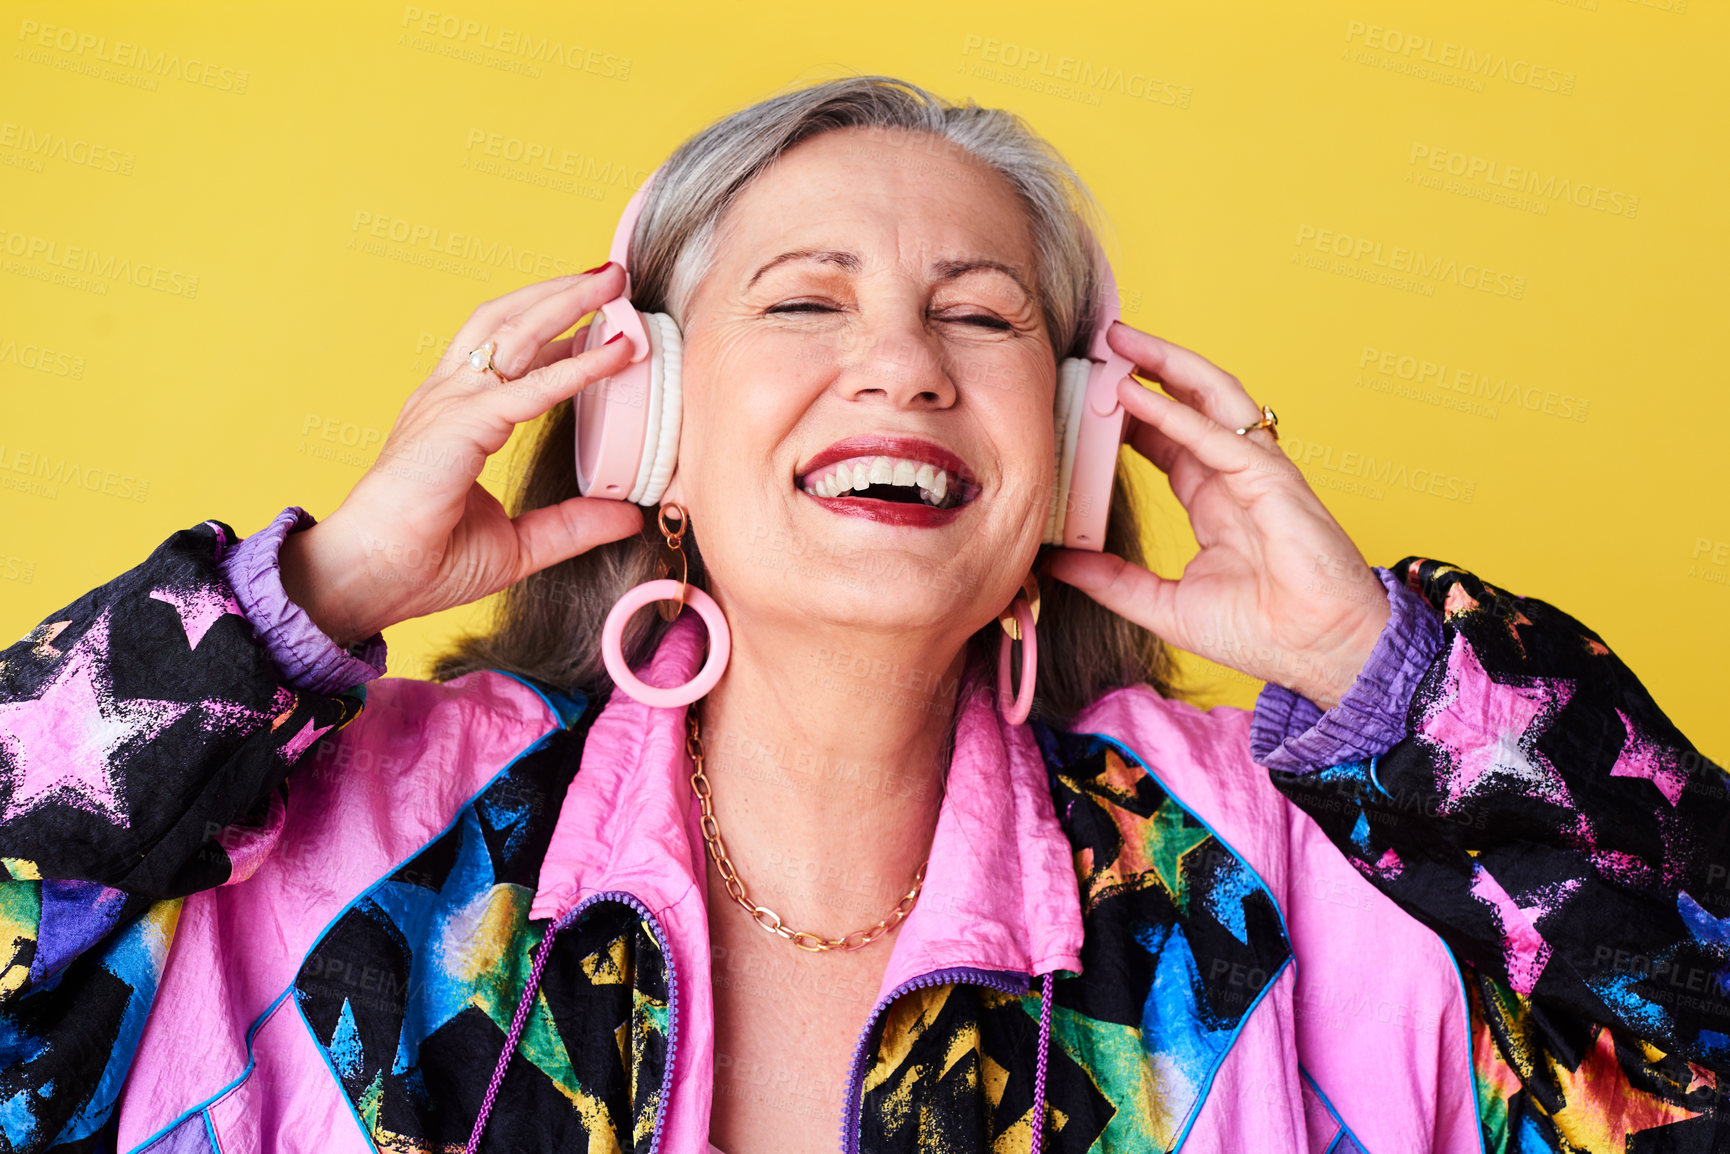 Buy stock photo Cropped shot of a cheerful and stylish senior woman listening to music on headphones against a yellow background